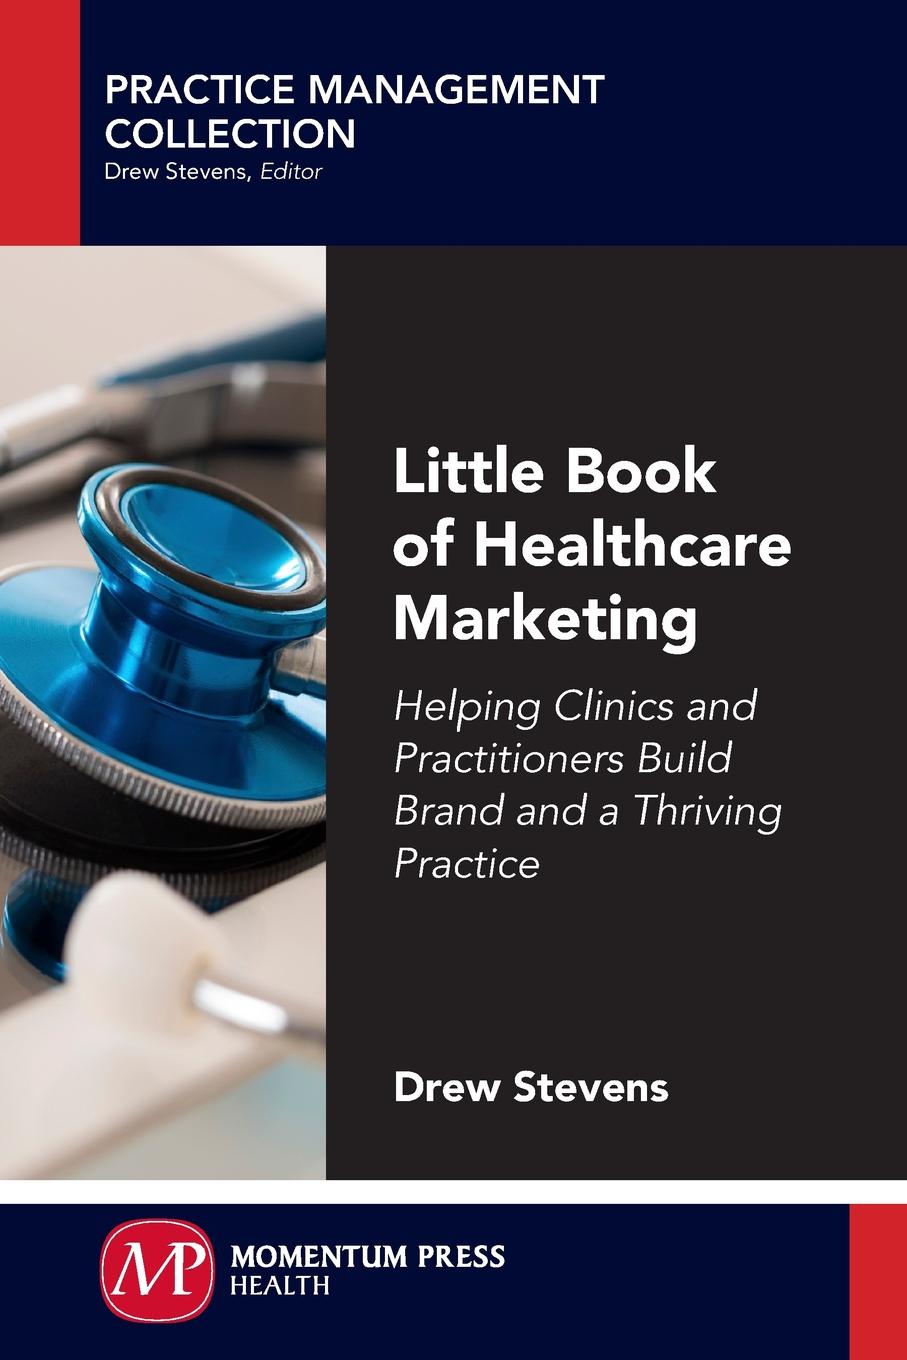 Little Book of Healthcare Marketing. Helping Clinics and Practitioners Build Brand and a Thriving Practice